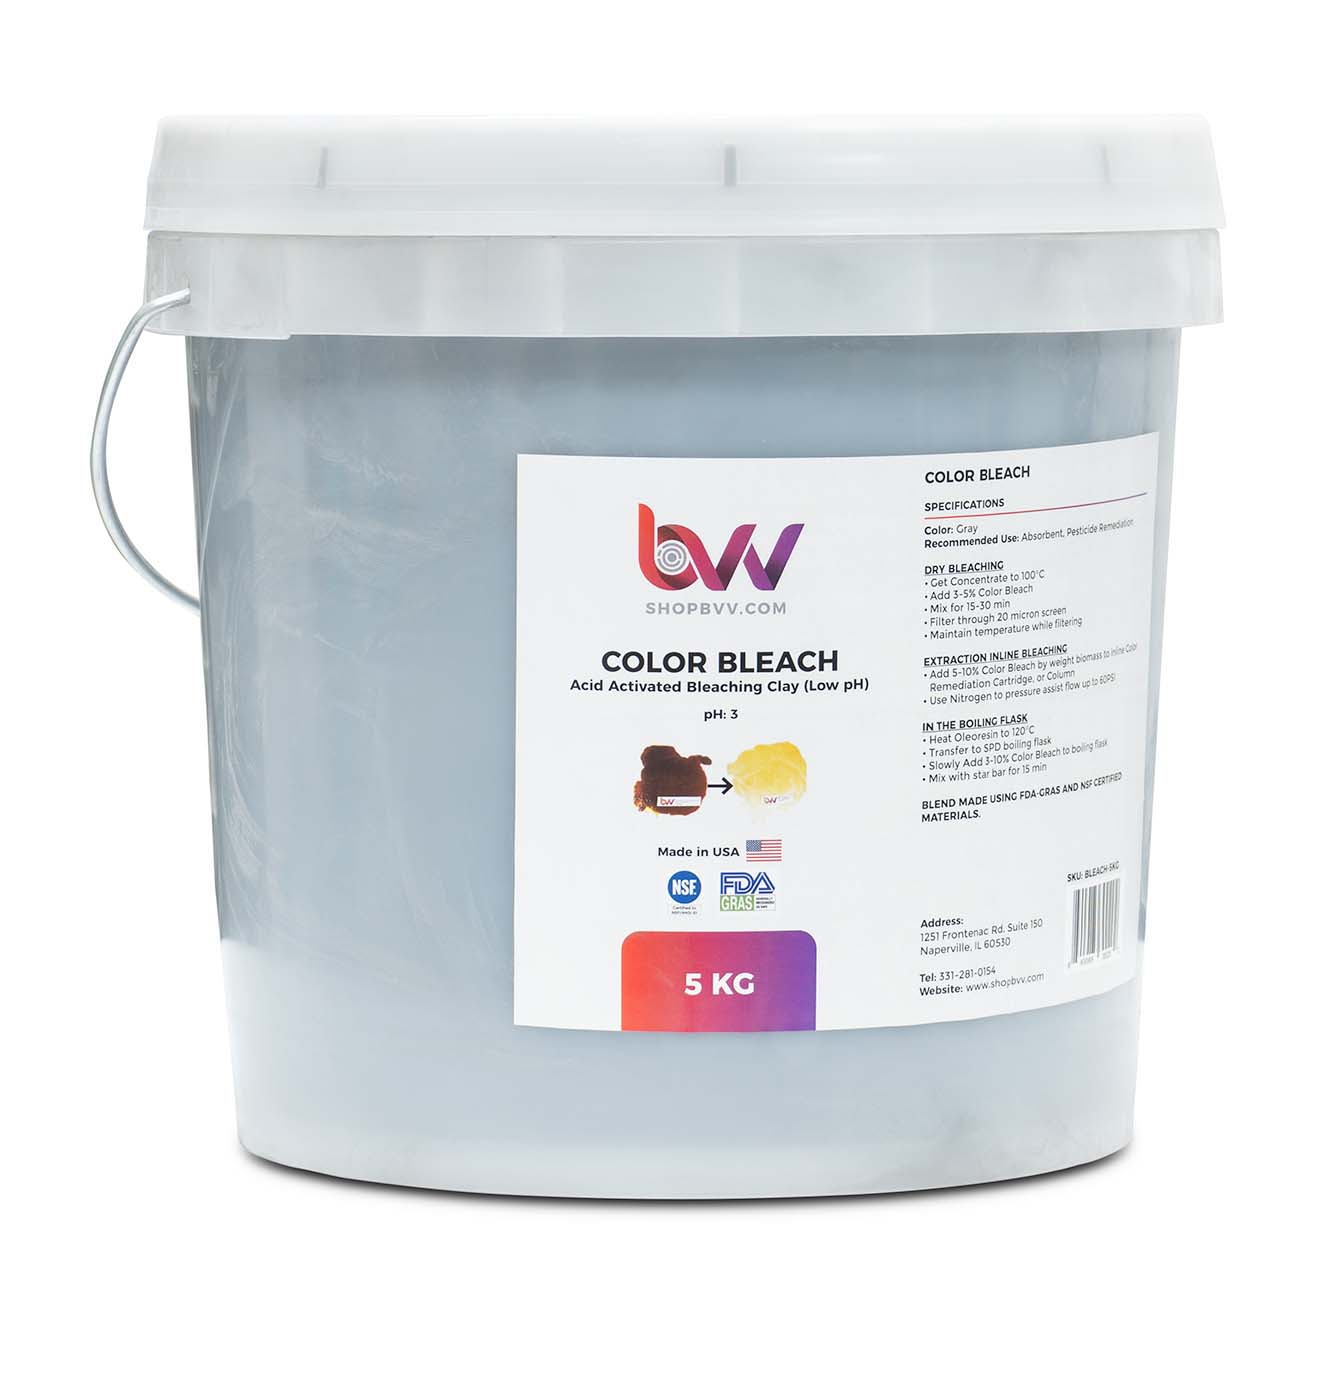 BVV Color Bleach for Edible Oils *FDA & NSF Certified Material (Compares to T-41™)